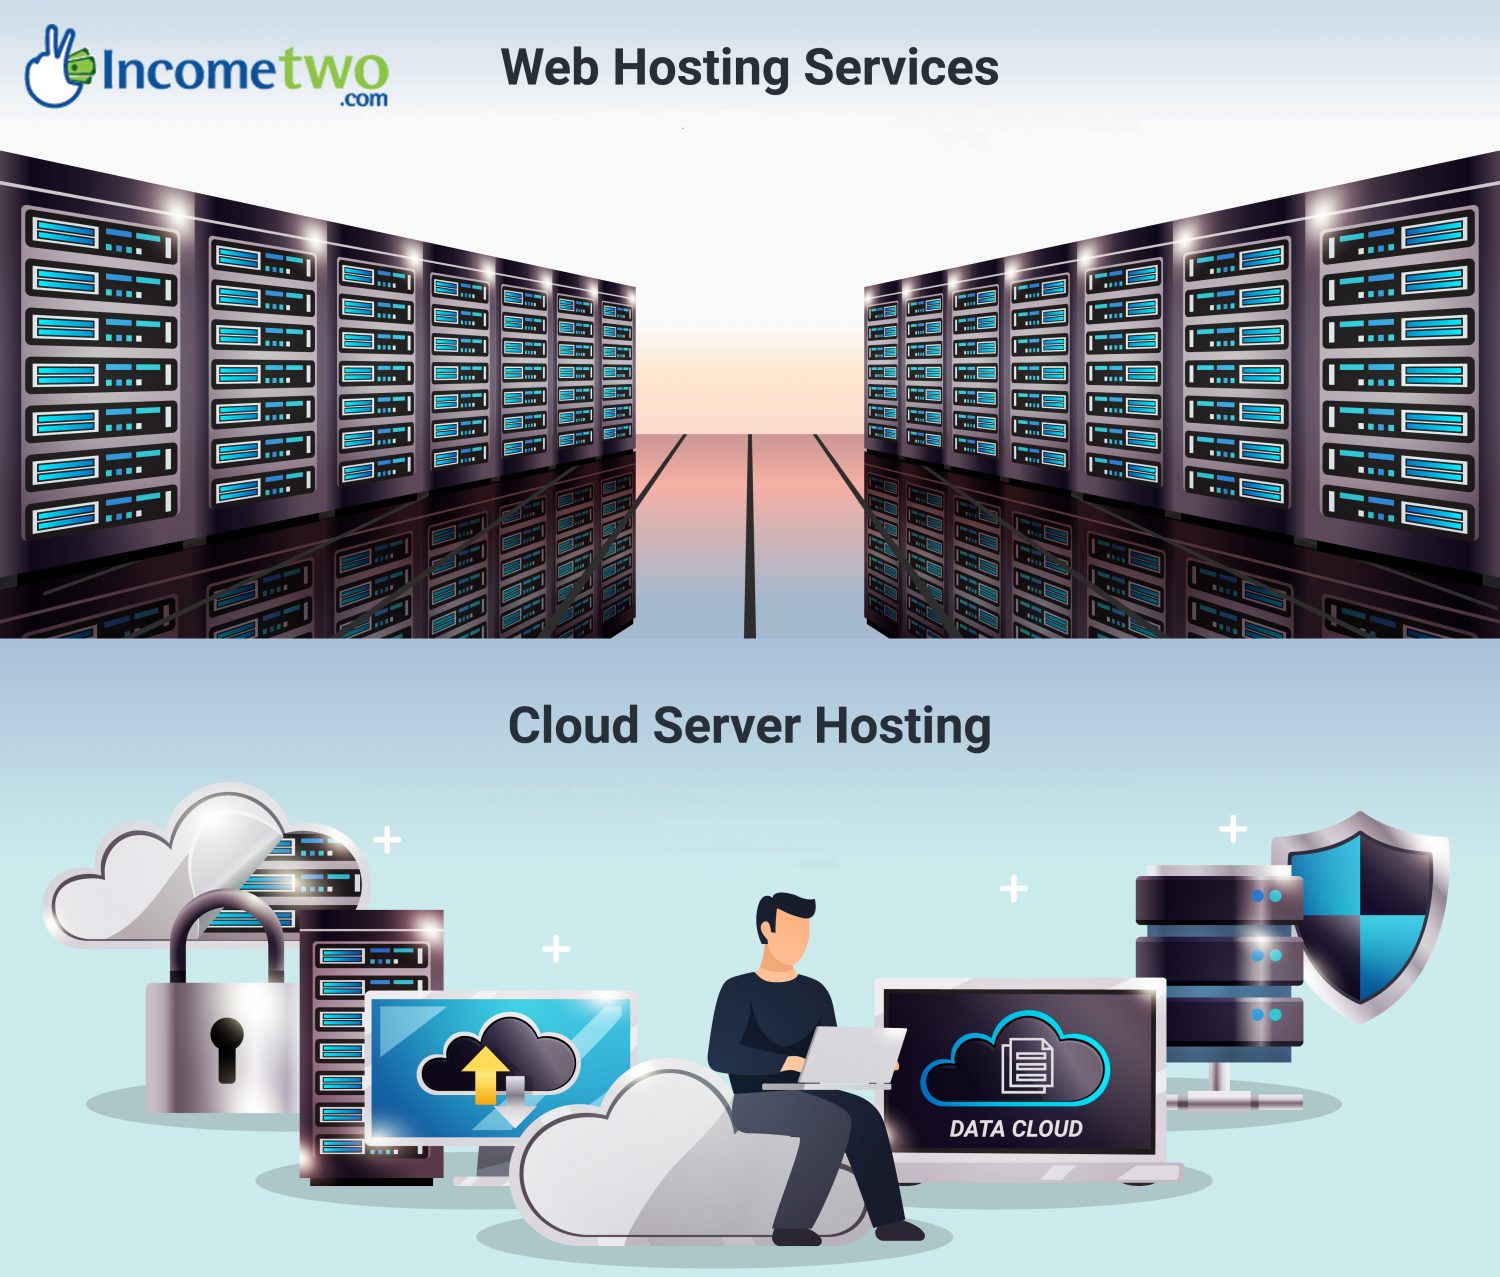 Bluehost Review 2020 Quality Web Hosting For Wordpress Websites Images, Photos, Reviews